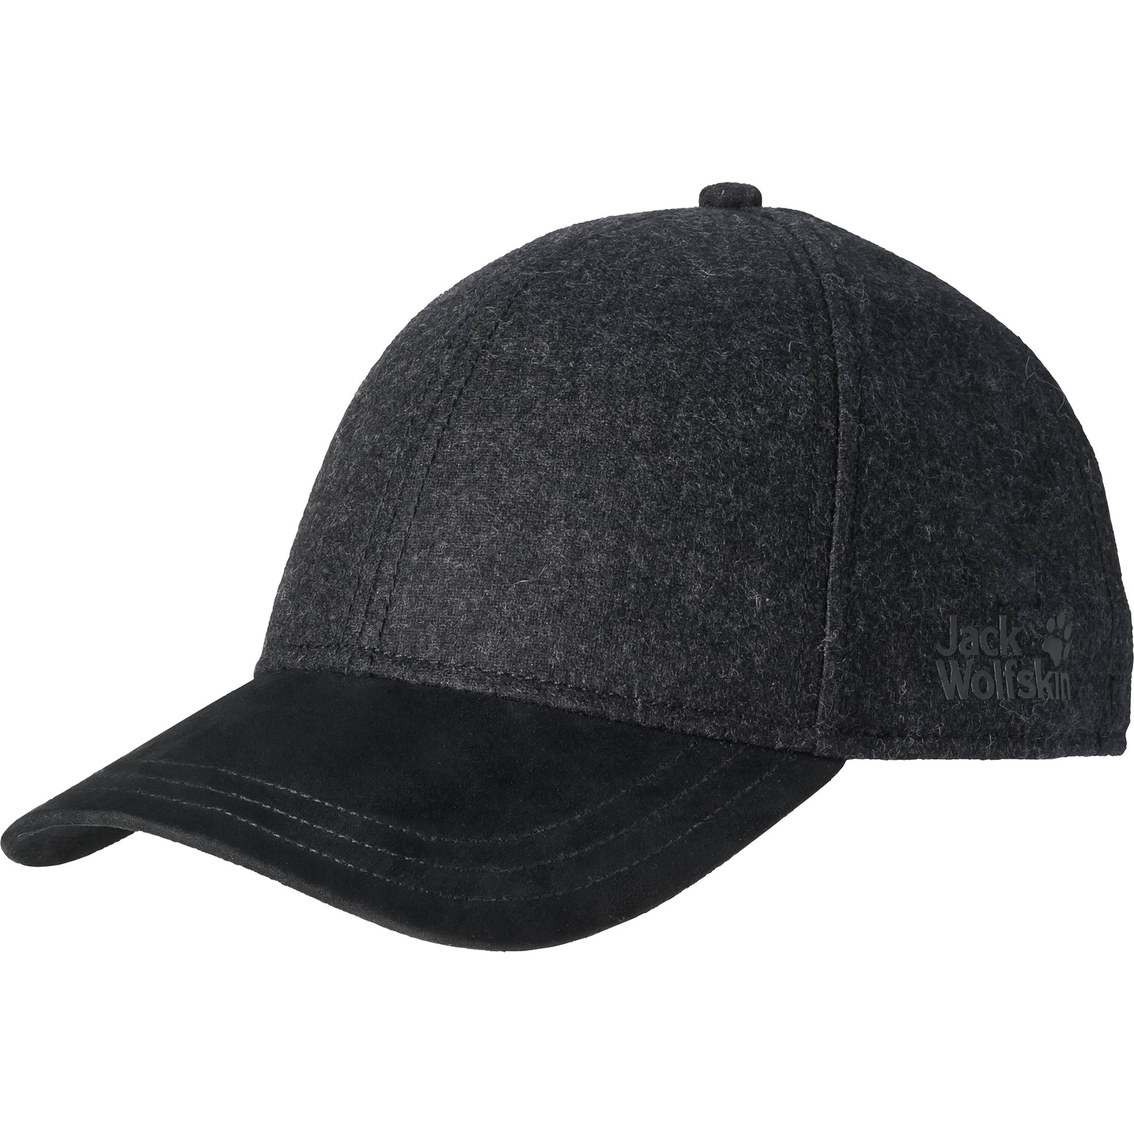 Jack Wolfskin Flanell Frost Cap | Hats & Visors | Clothing & Accessories |  Shop The Exchange